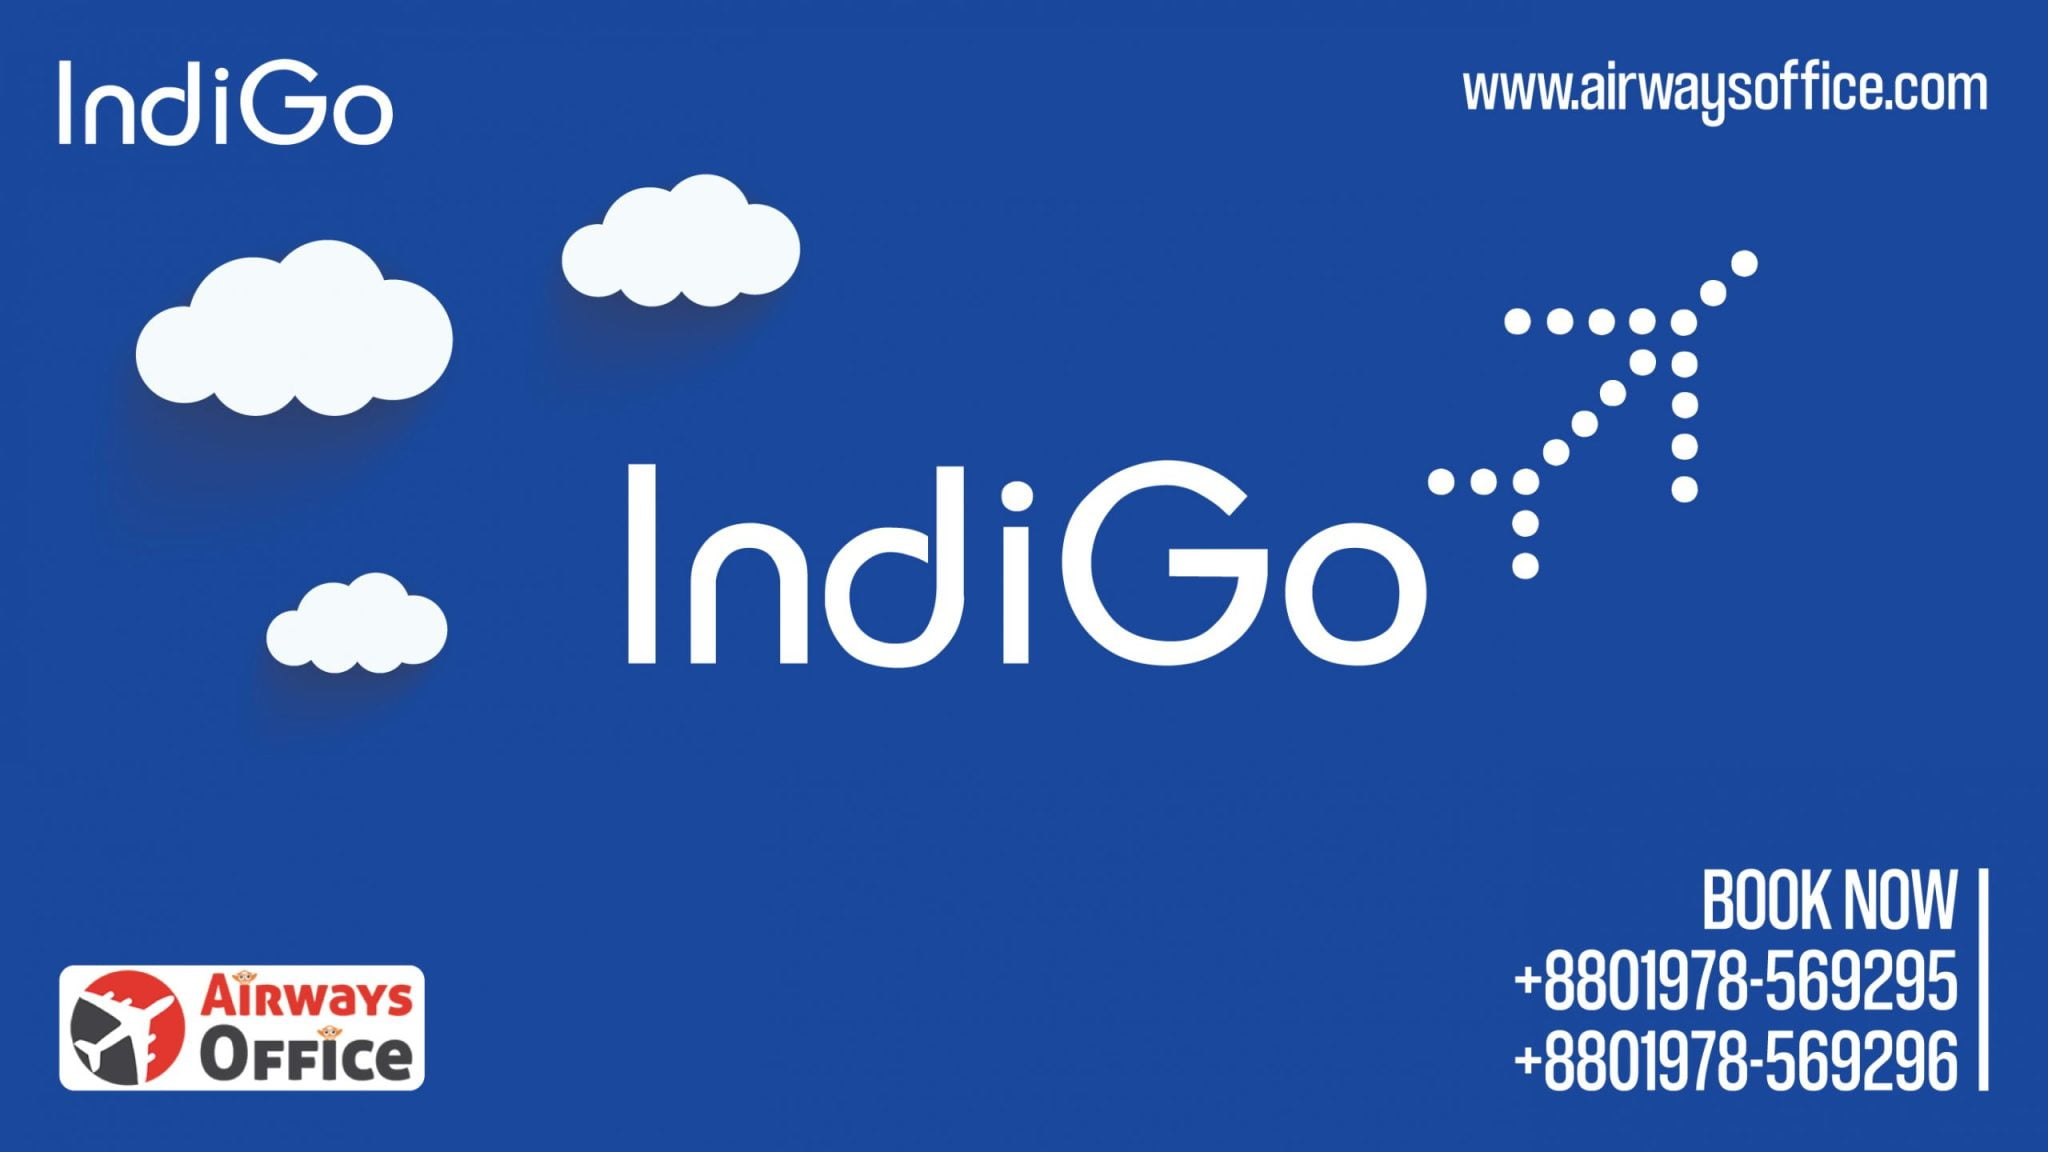 Indigo Airlines B2B Travel Agents Deal